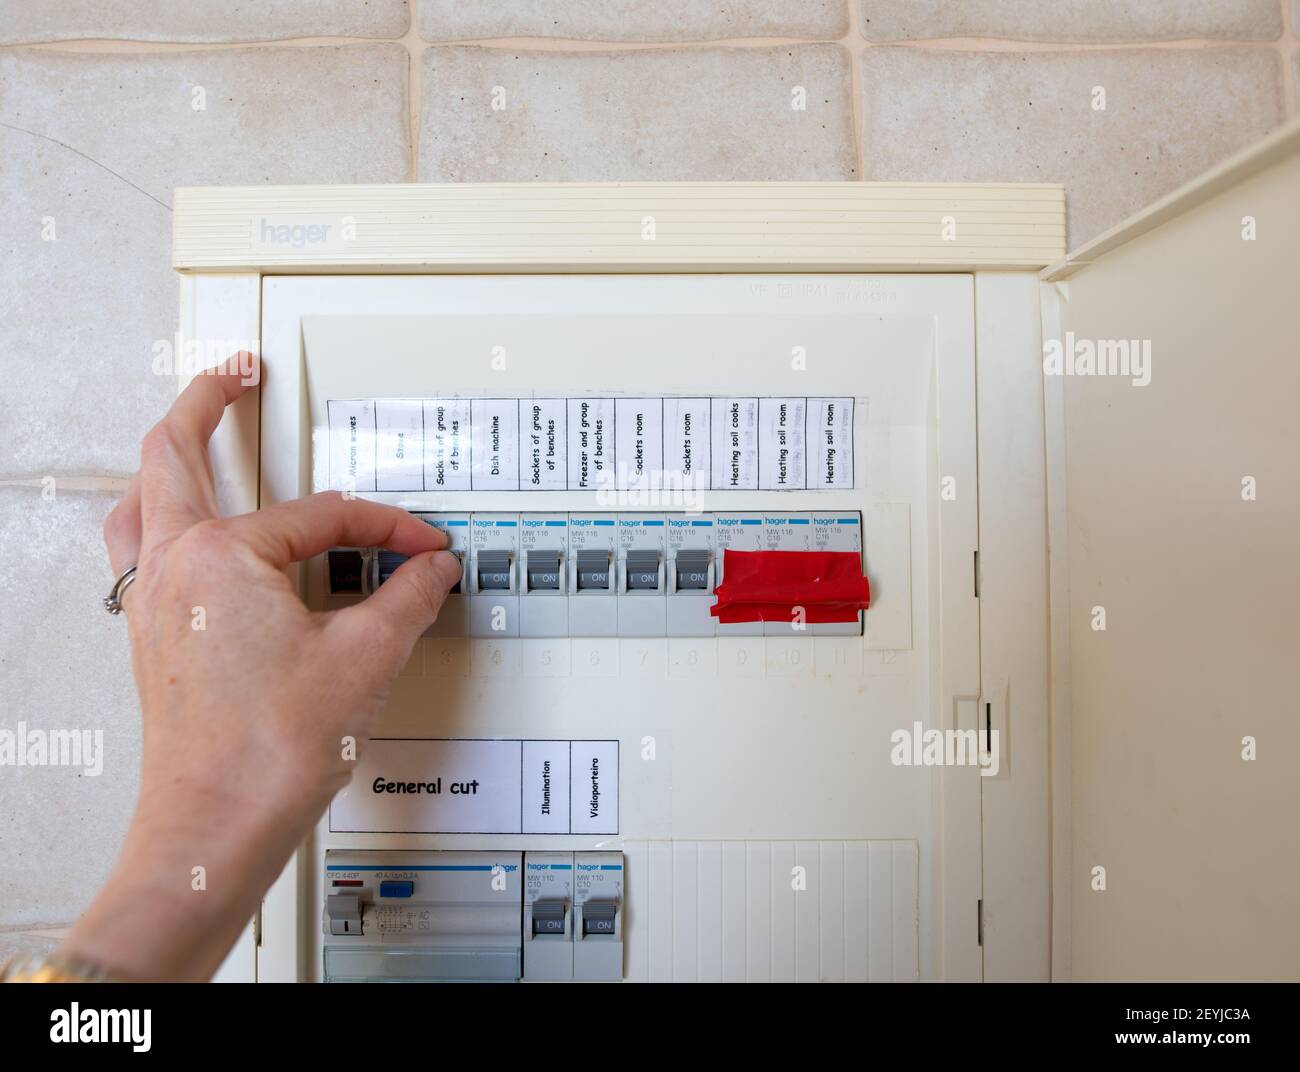 Lagos, Portugal: February 2021; Hager distribution or electrical panel on a tiled kitchen wall Stock Photo